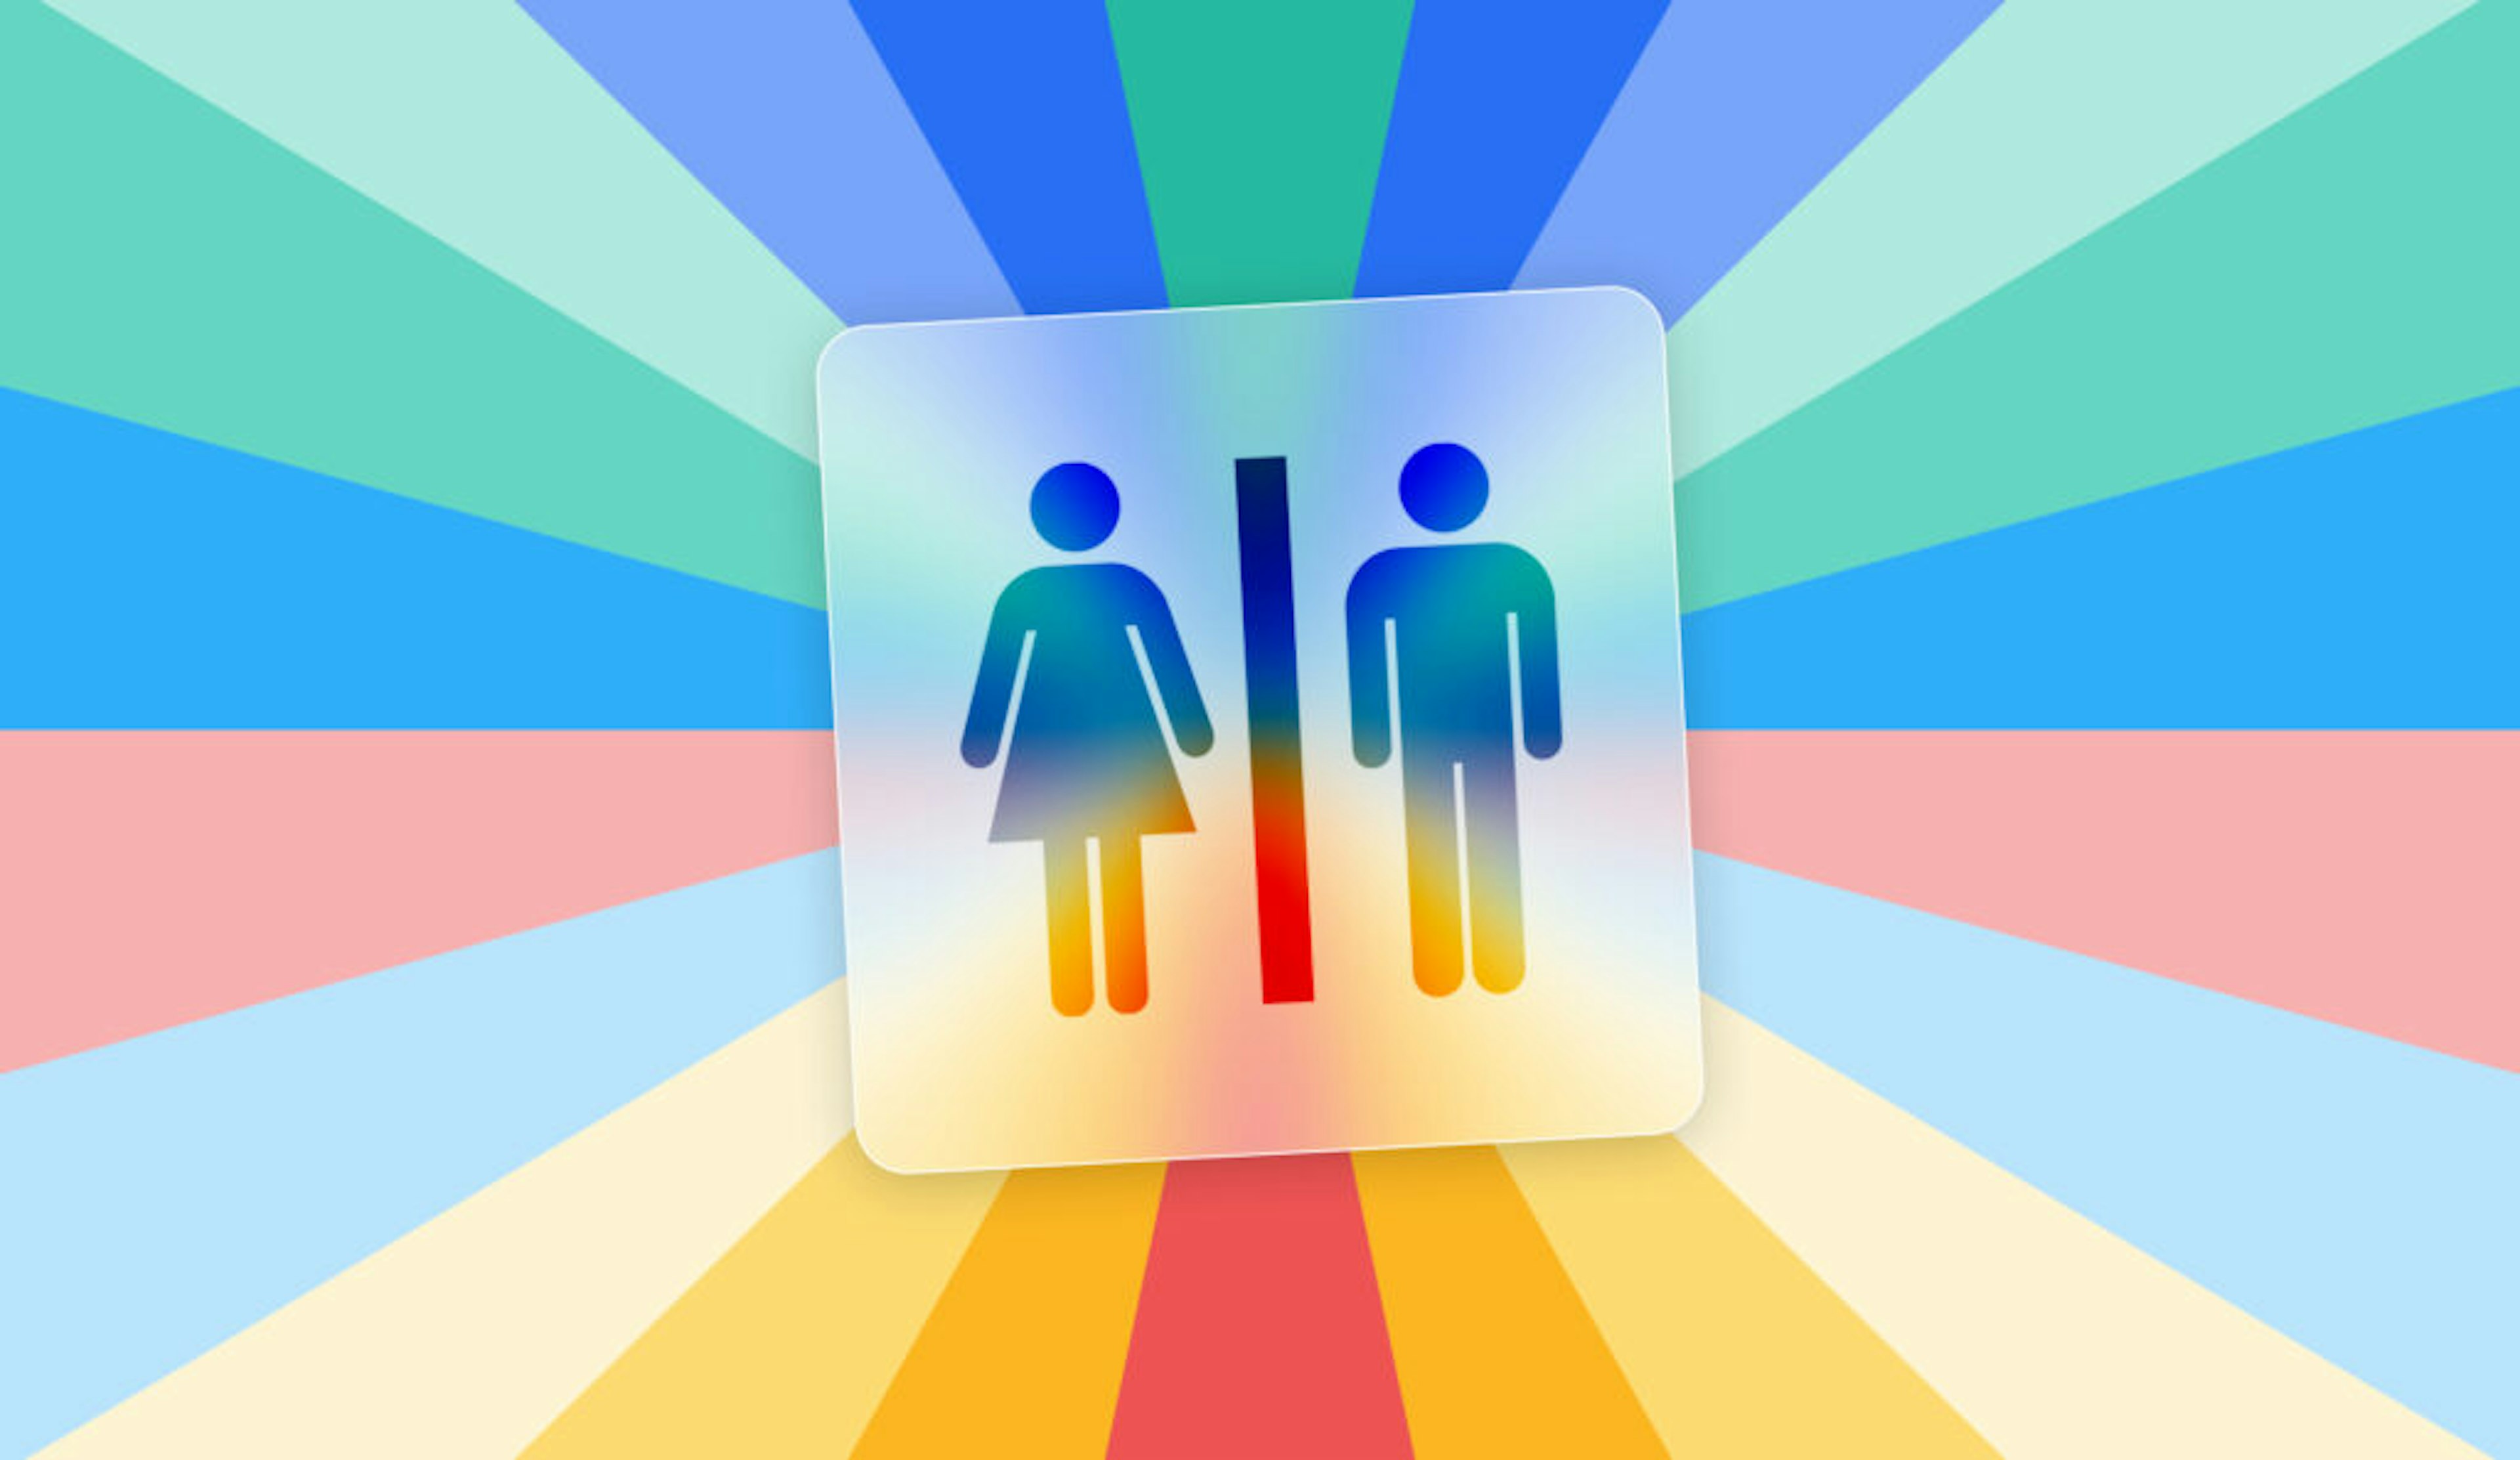 Ladies and men's lavatory signs on  colourful bakground